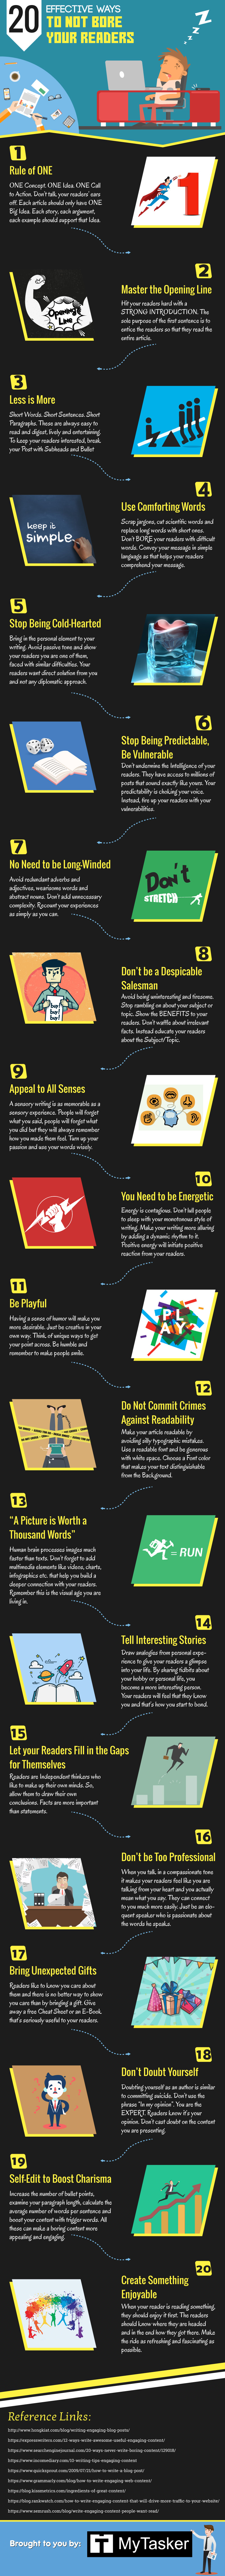 How to write engaging content - Infographic